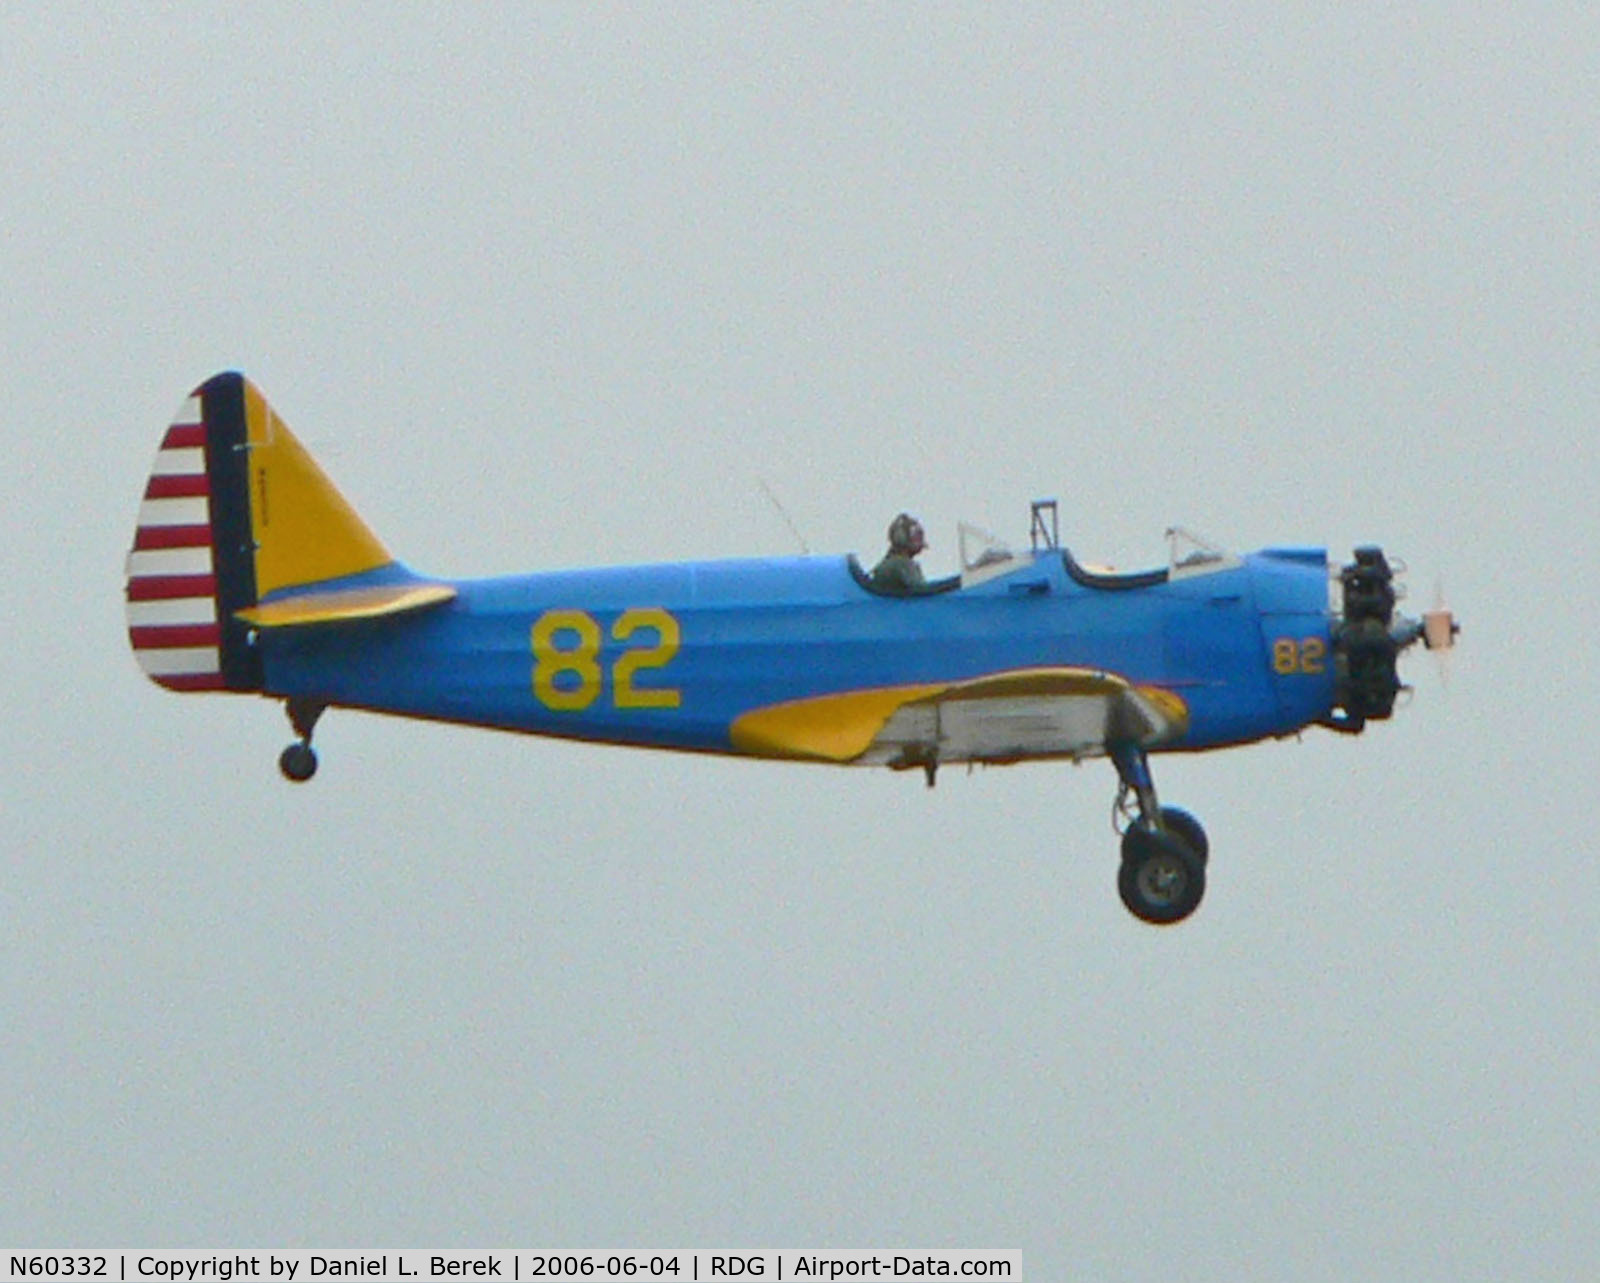 N60332, 1946 Fairchild (St. Louis) PT-23A Cornell (M-62C) C/N 225SL, Bright blue and yellow Cornell trainer contrasts against a brooding, overcast sky.